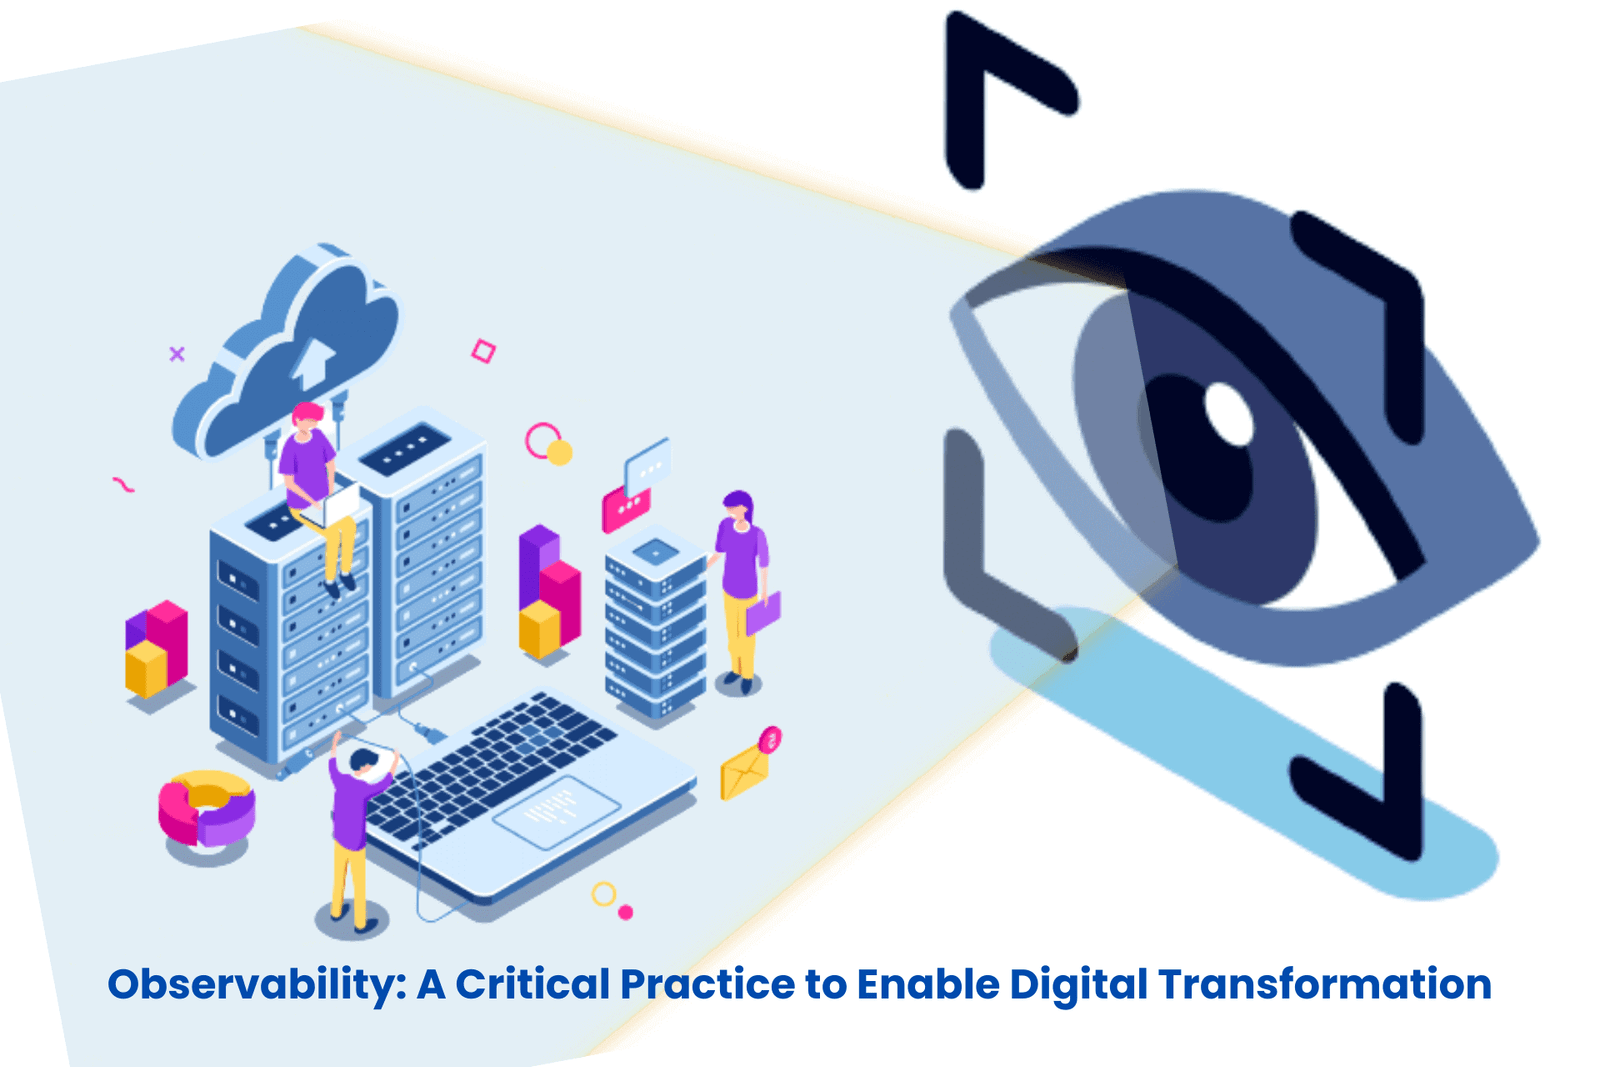 Observability: A Critical Practice to Enable Digital Transformation